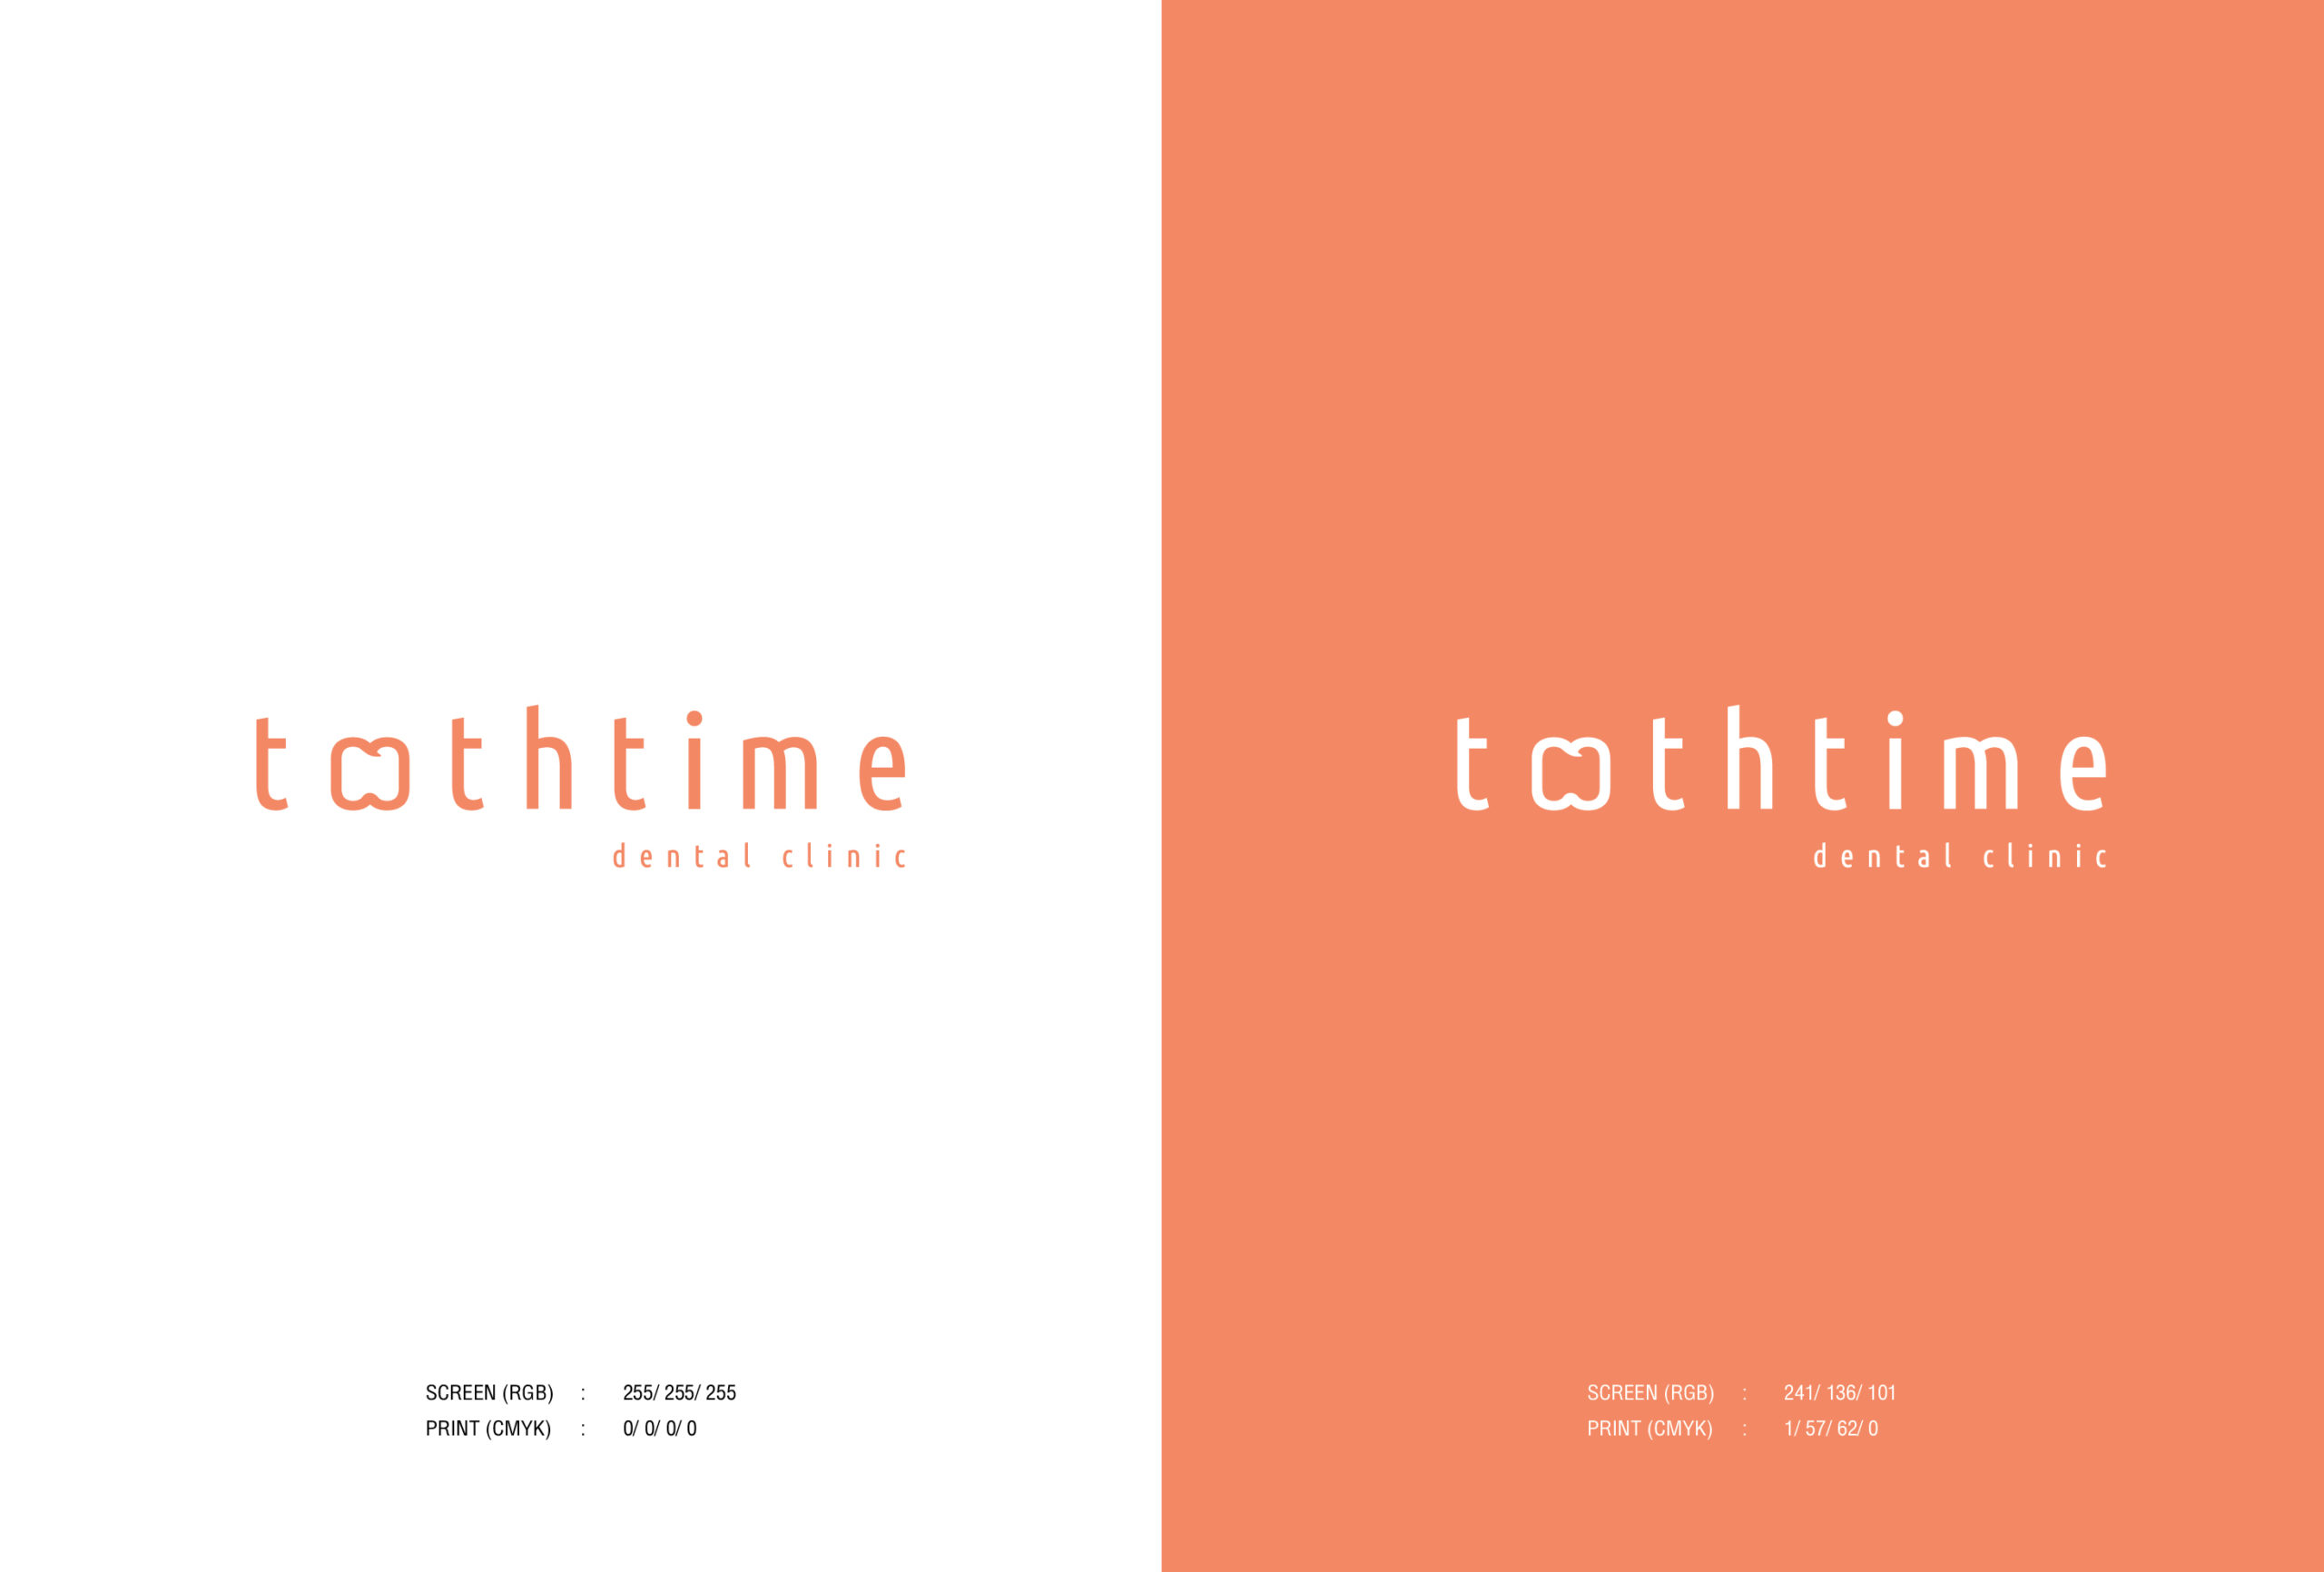 toothtime _for web-03